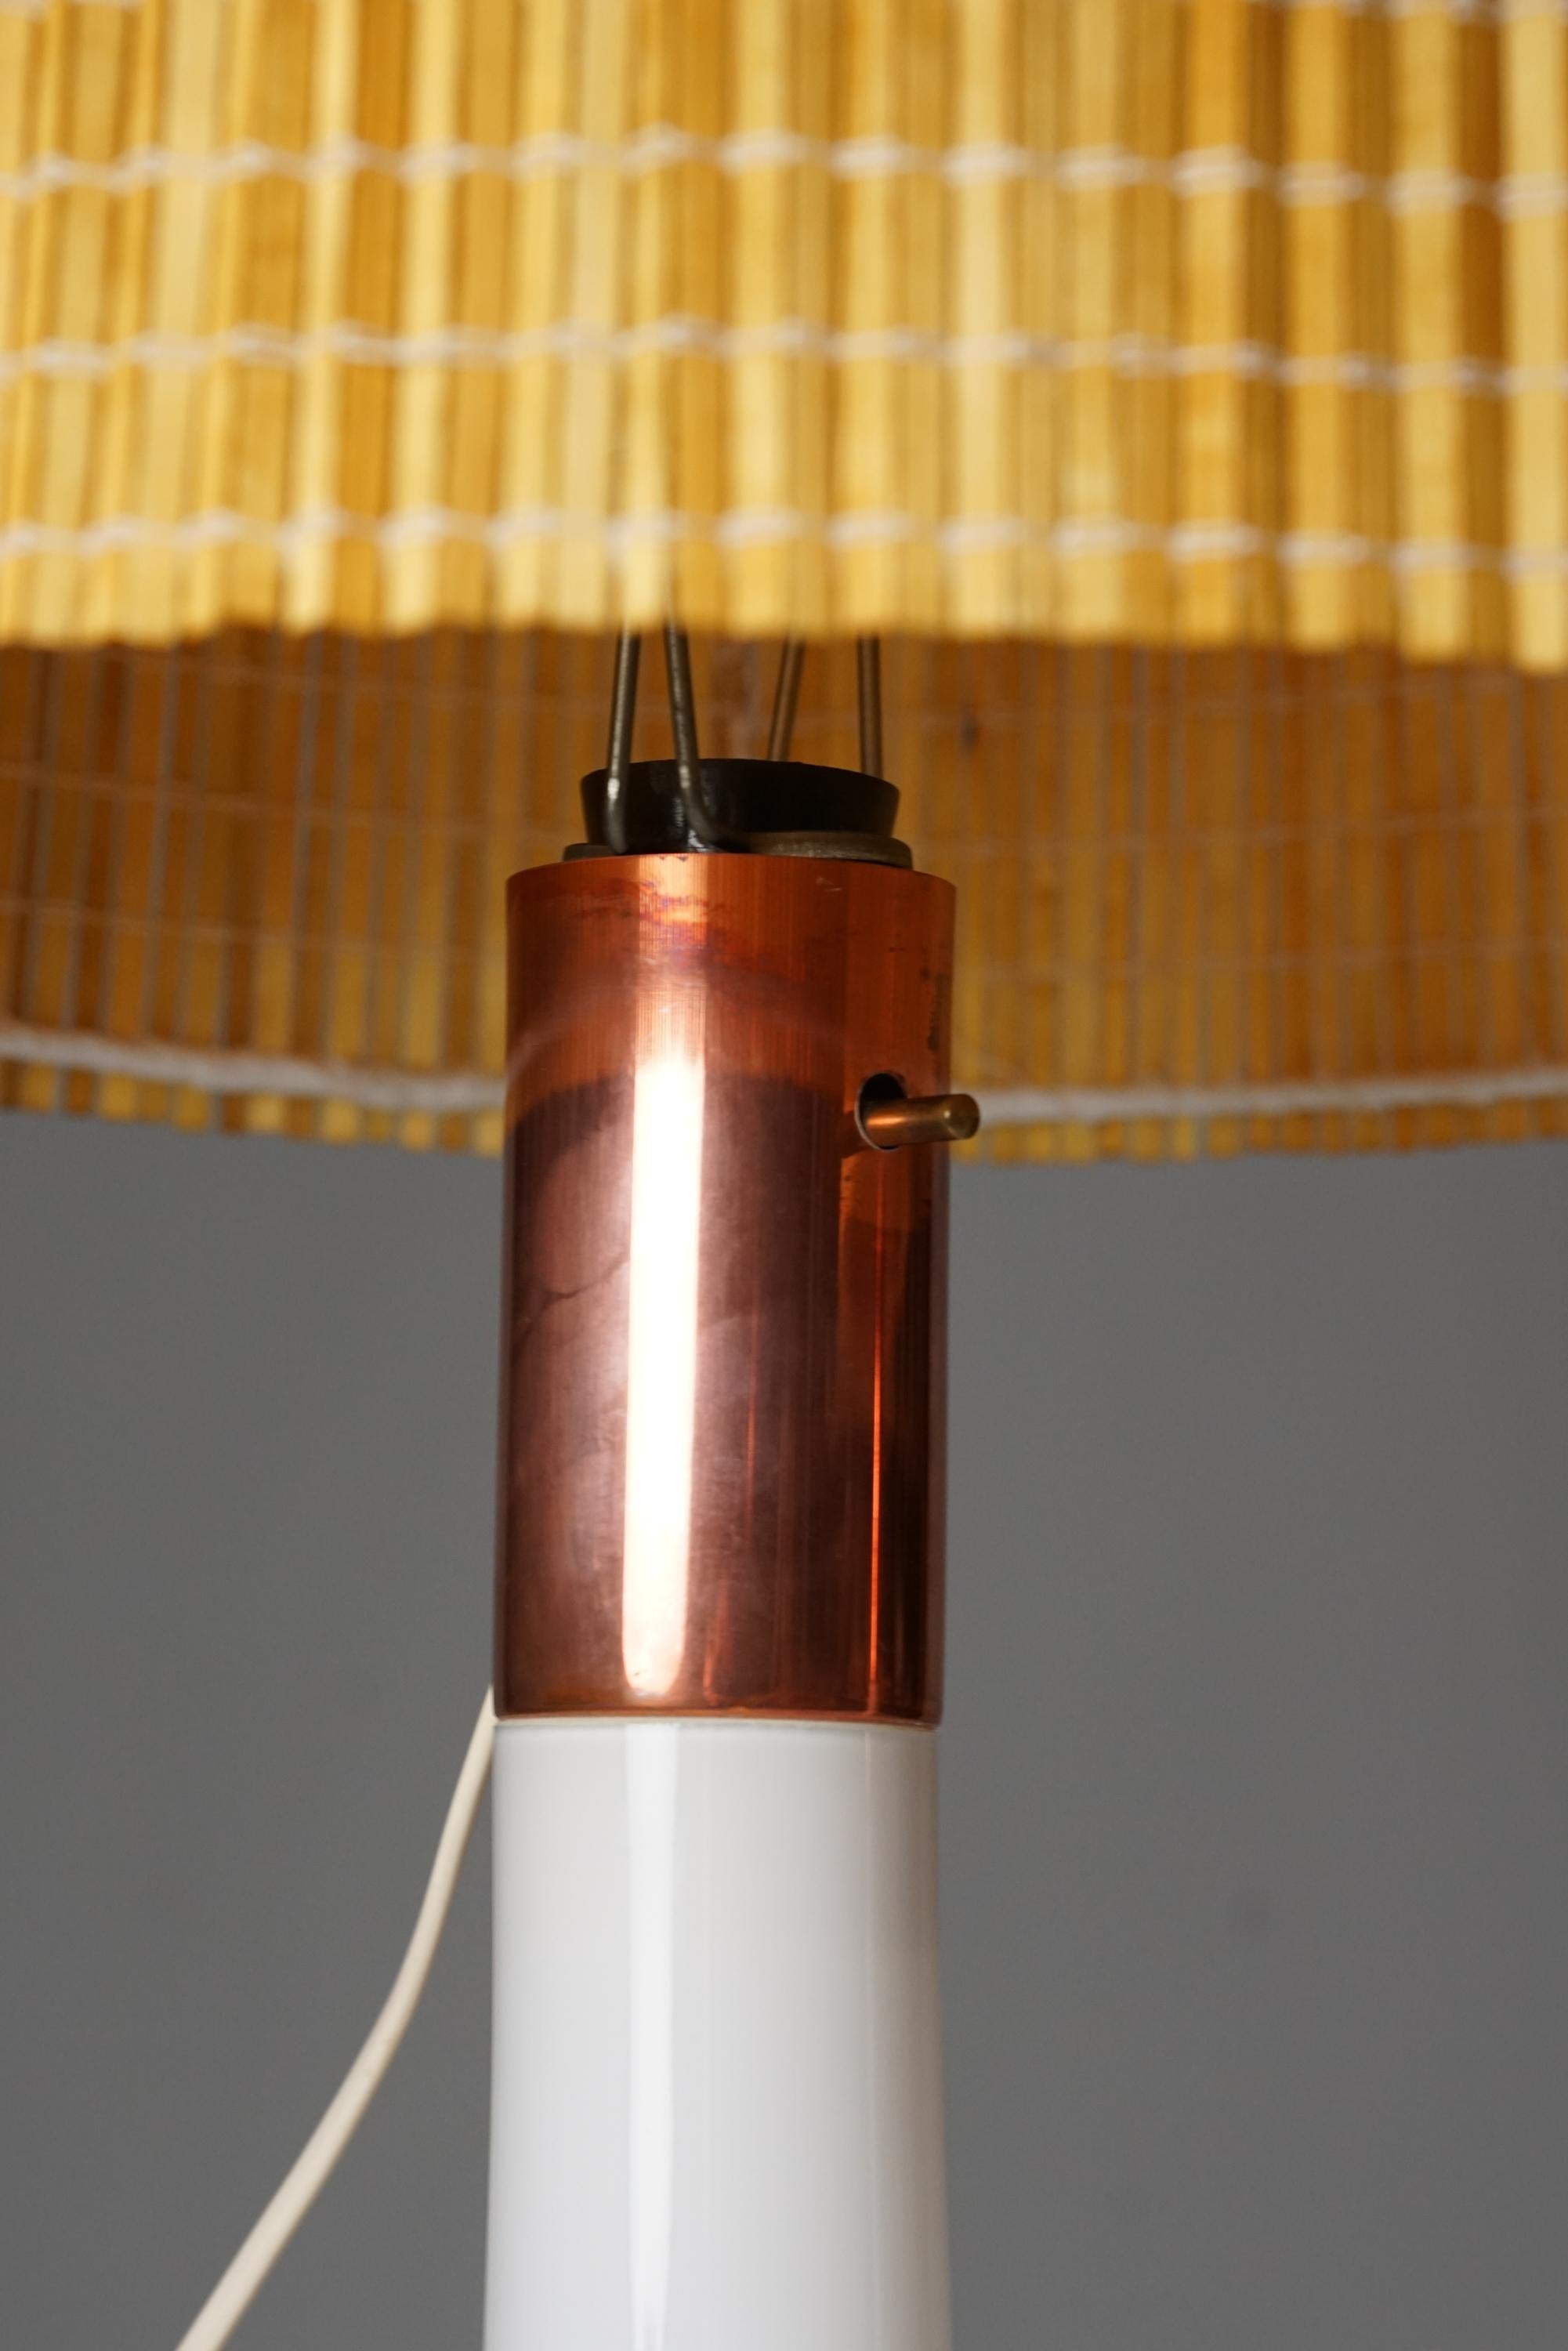 Mid-20th Century Pair of Lisa Johansson-Pape Glass Lamps With Wooden Slat Shades, Orno Oy, 1960s For Sale